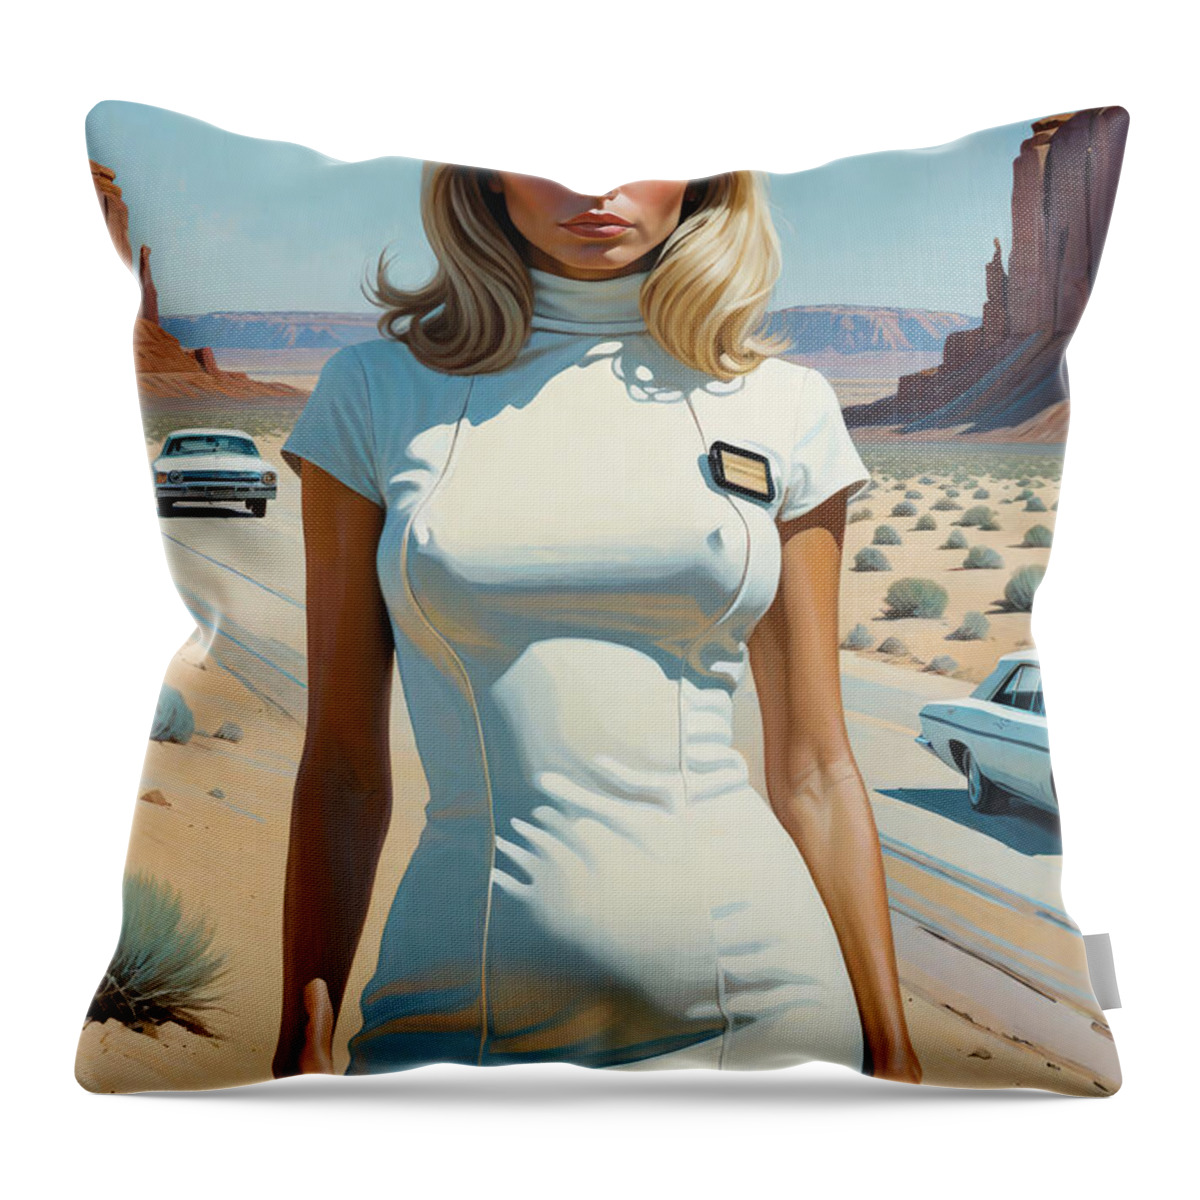 White Dress Throw Pillow featuring the painting Nancy Sinatra by My Head Cinema